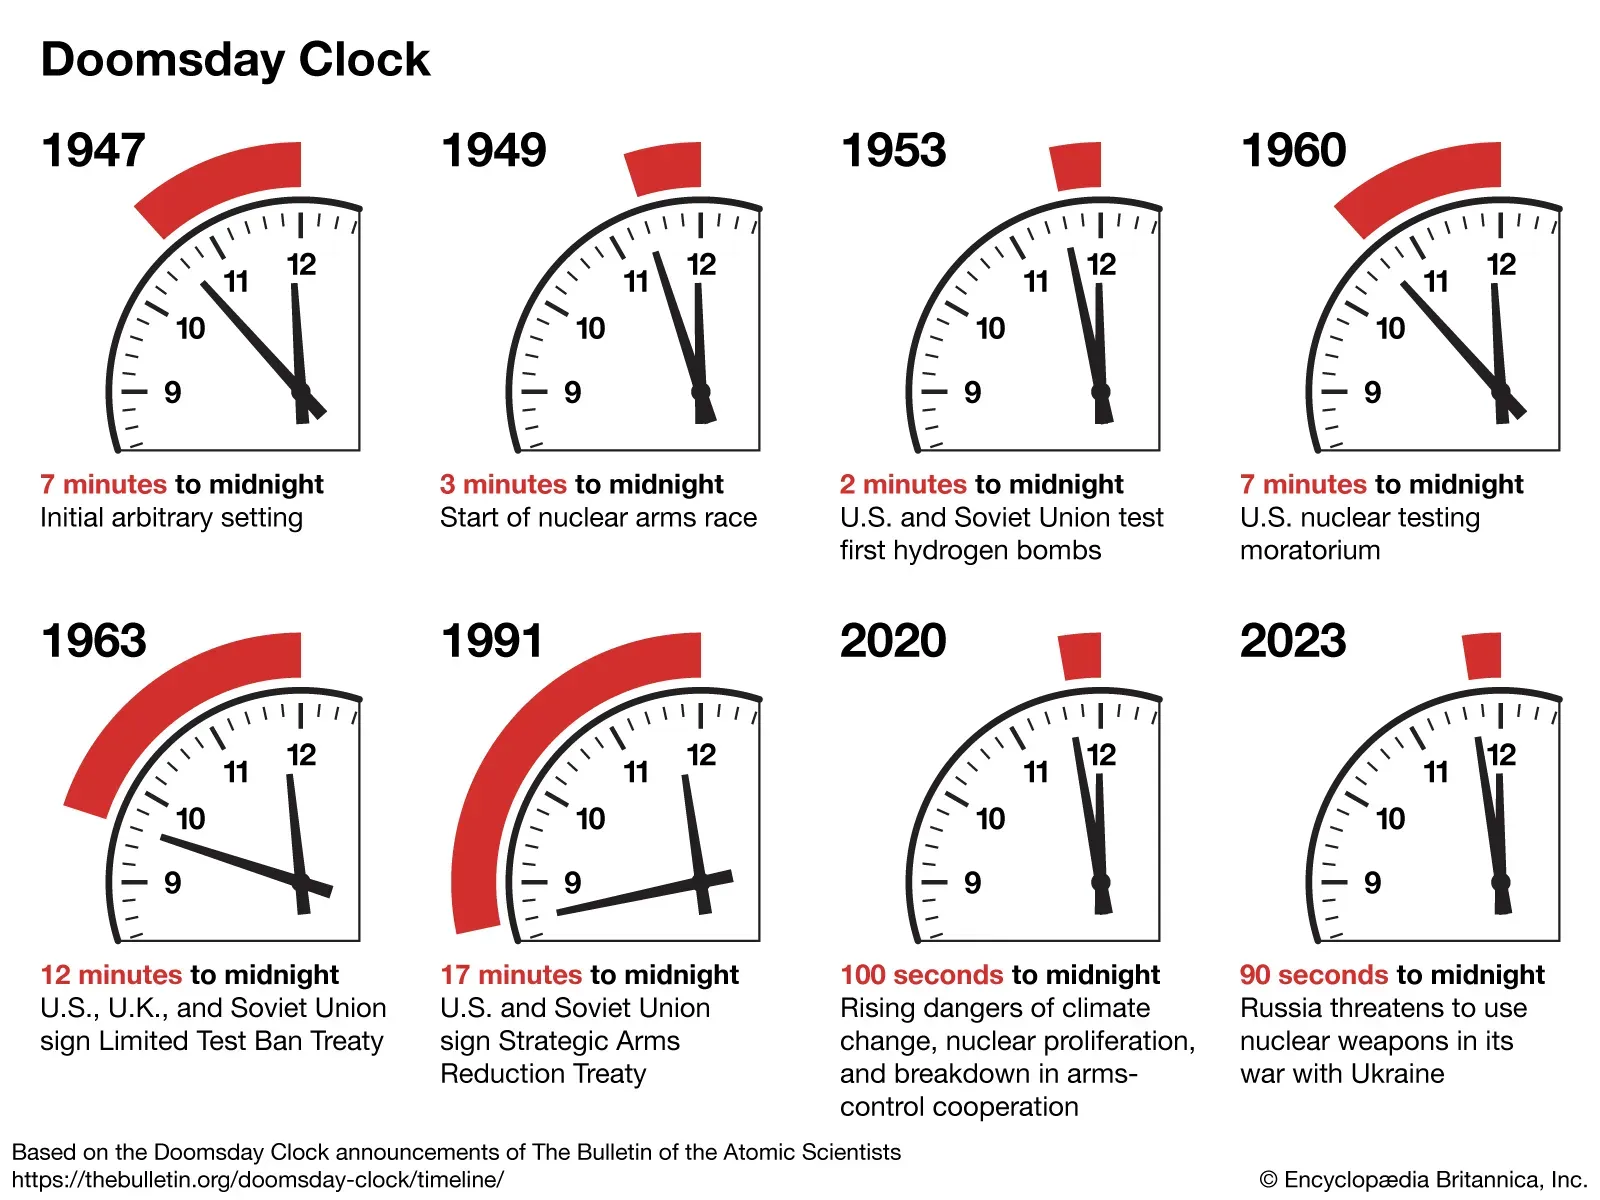 Doomsday Clock over the years, from 1947 through 2023.